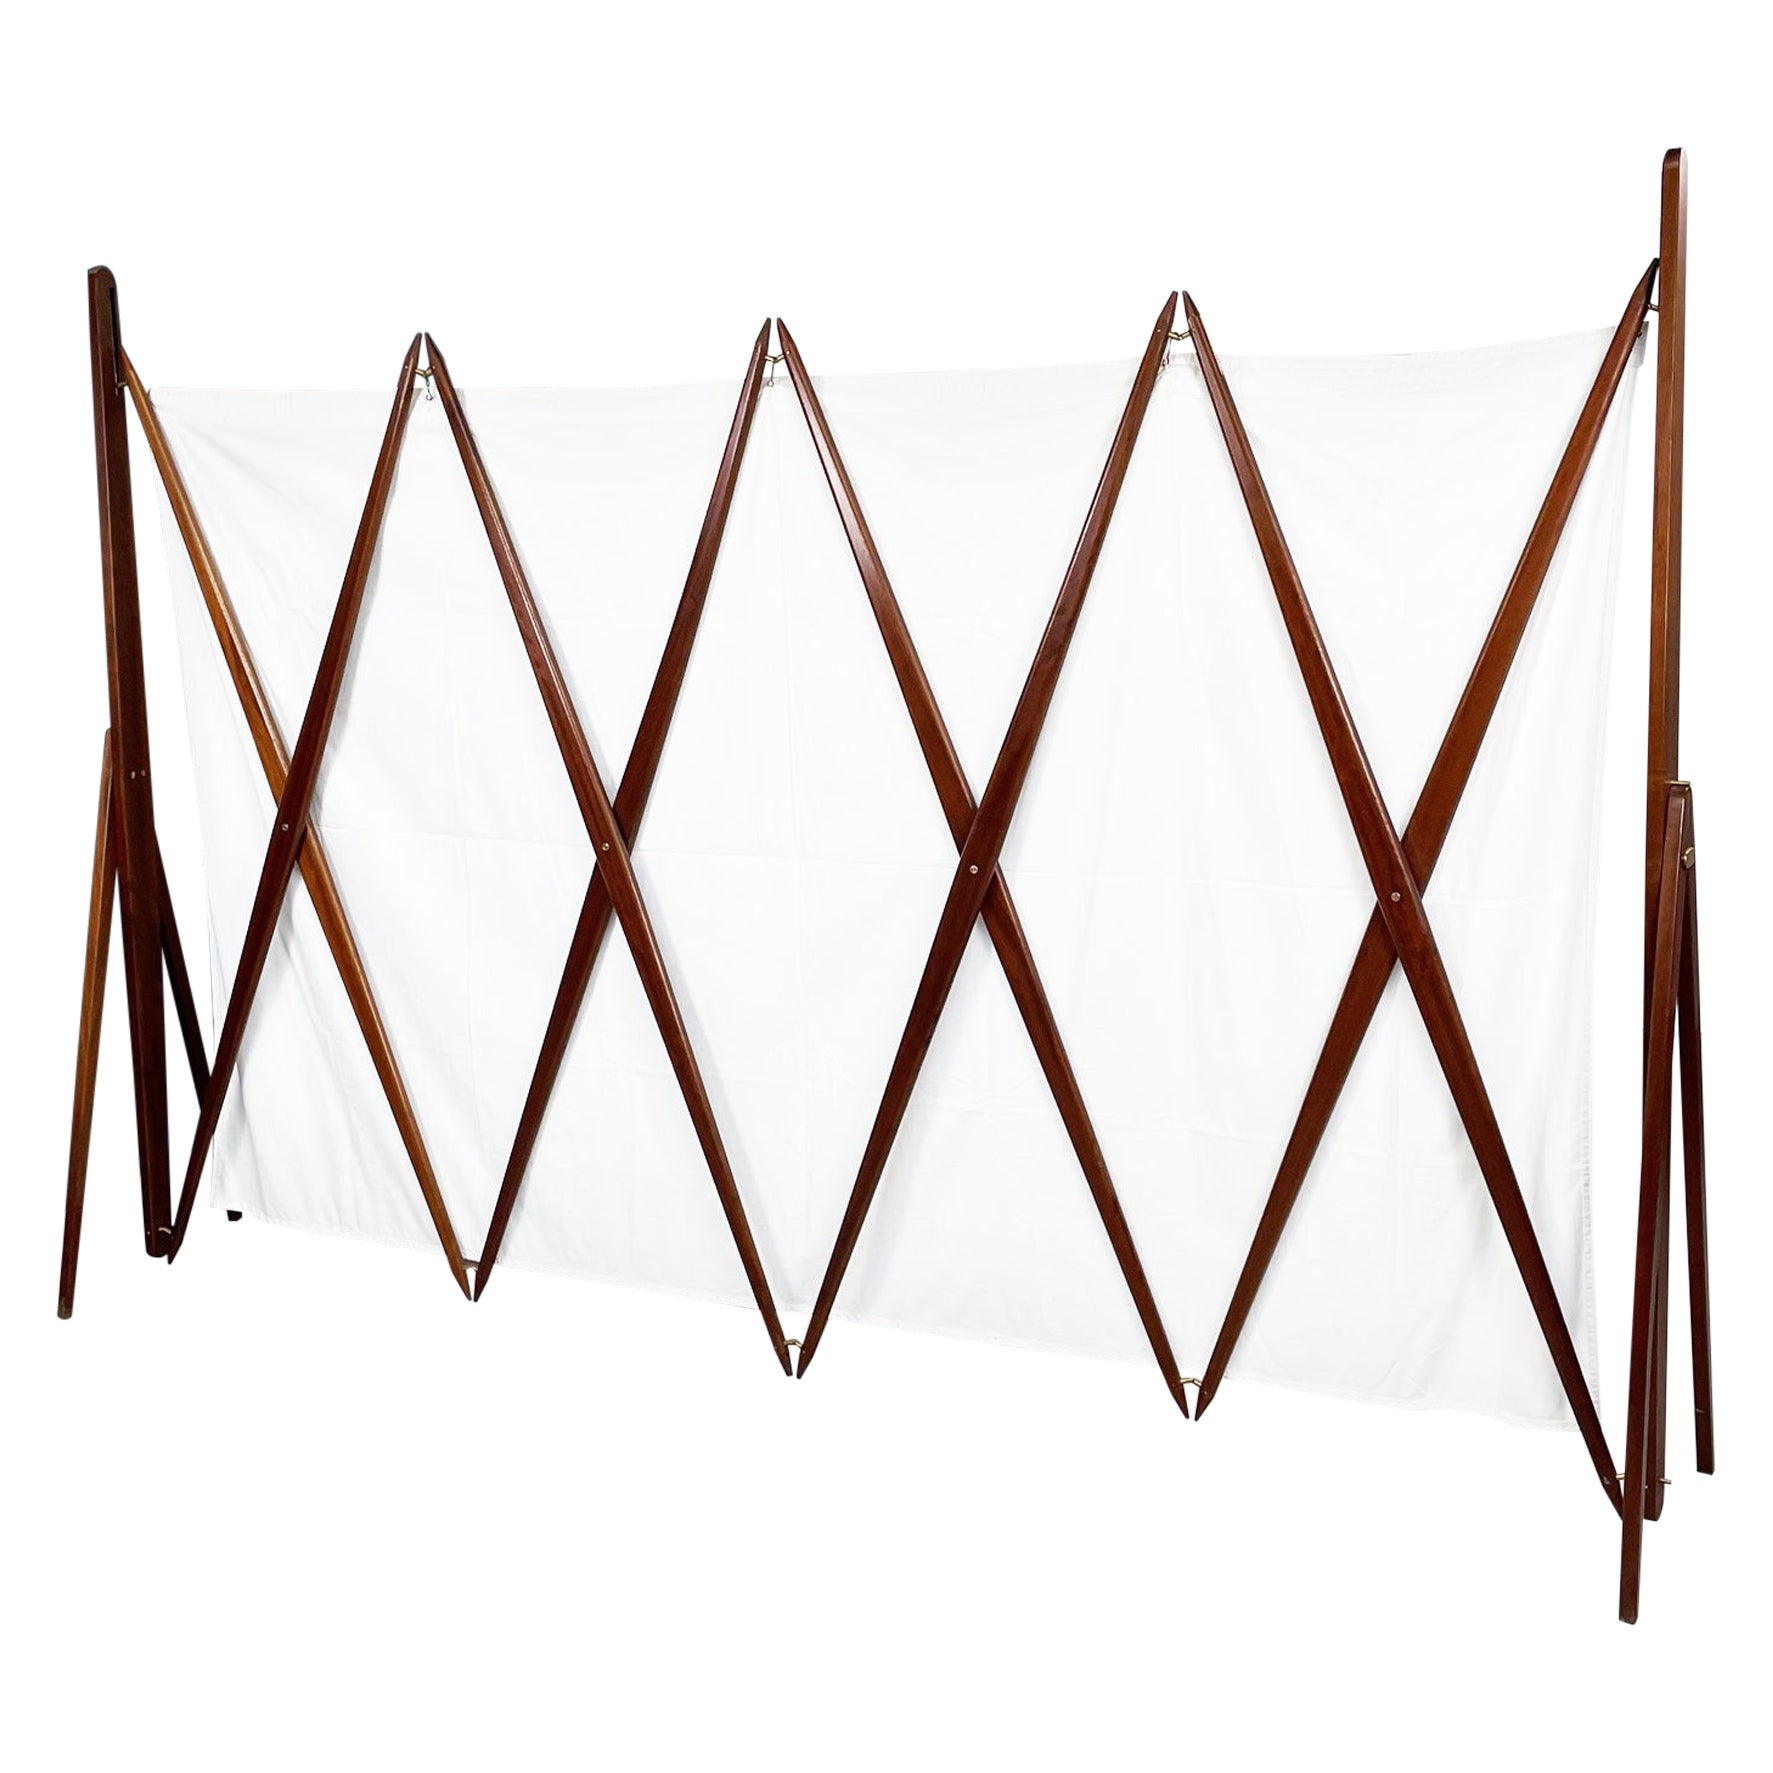 Italian Mid-Century Rectangular Divider in Wood, White Fabric and Metal, 1950s For Sale